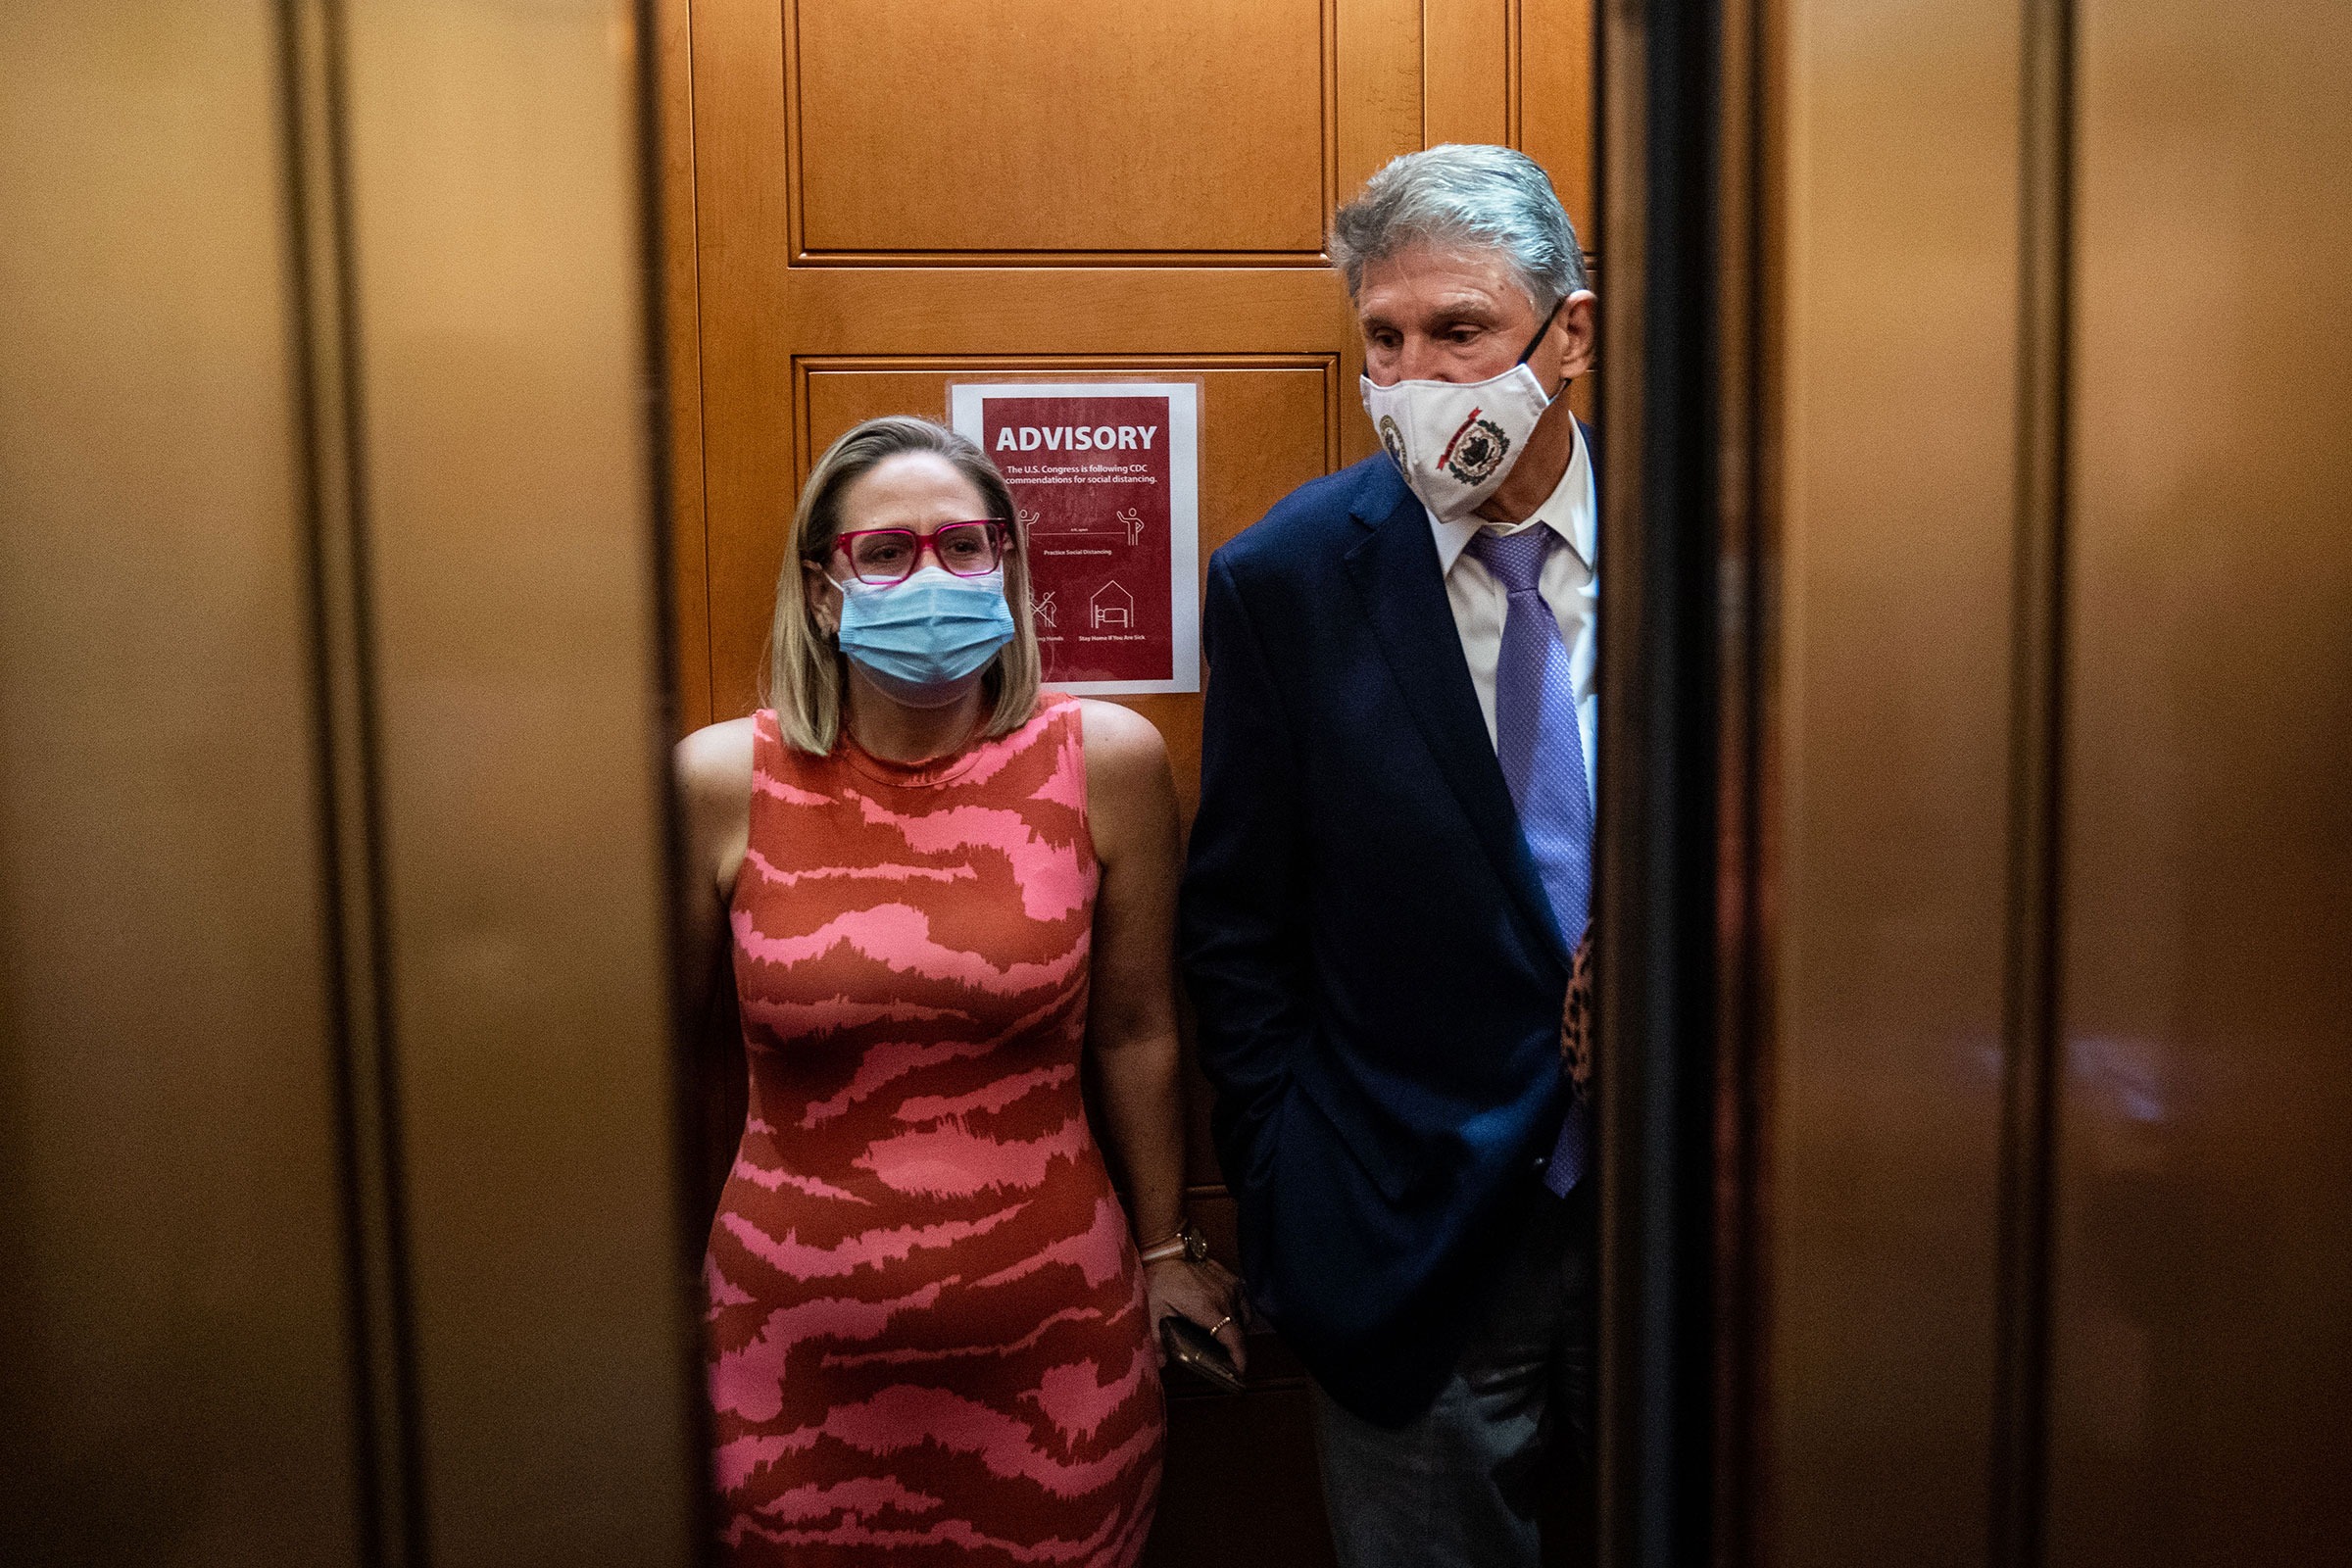 Sen. Kyrsten Sinema and Sen. Joe Manchin in the elevator on their way to go to the Senate Chamber on Sept. 30, 2021 on Capitol Hill in Washington. (Kent Nishimura—Los Angeles Times/Getty Images)